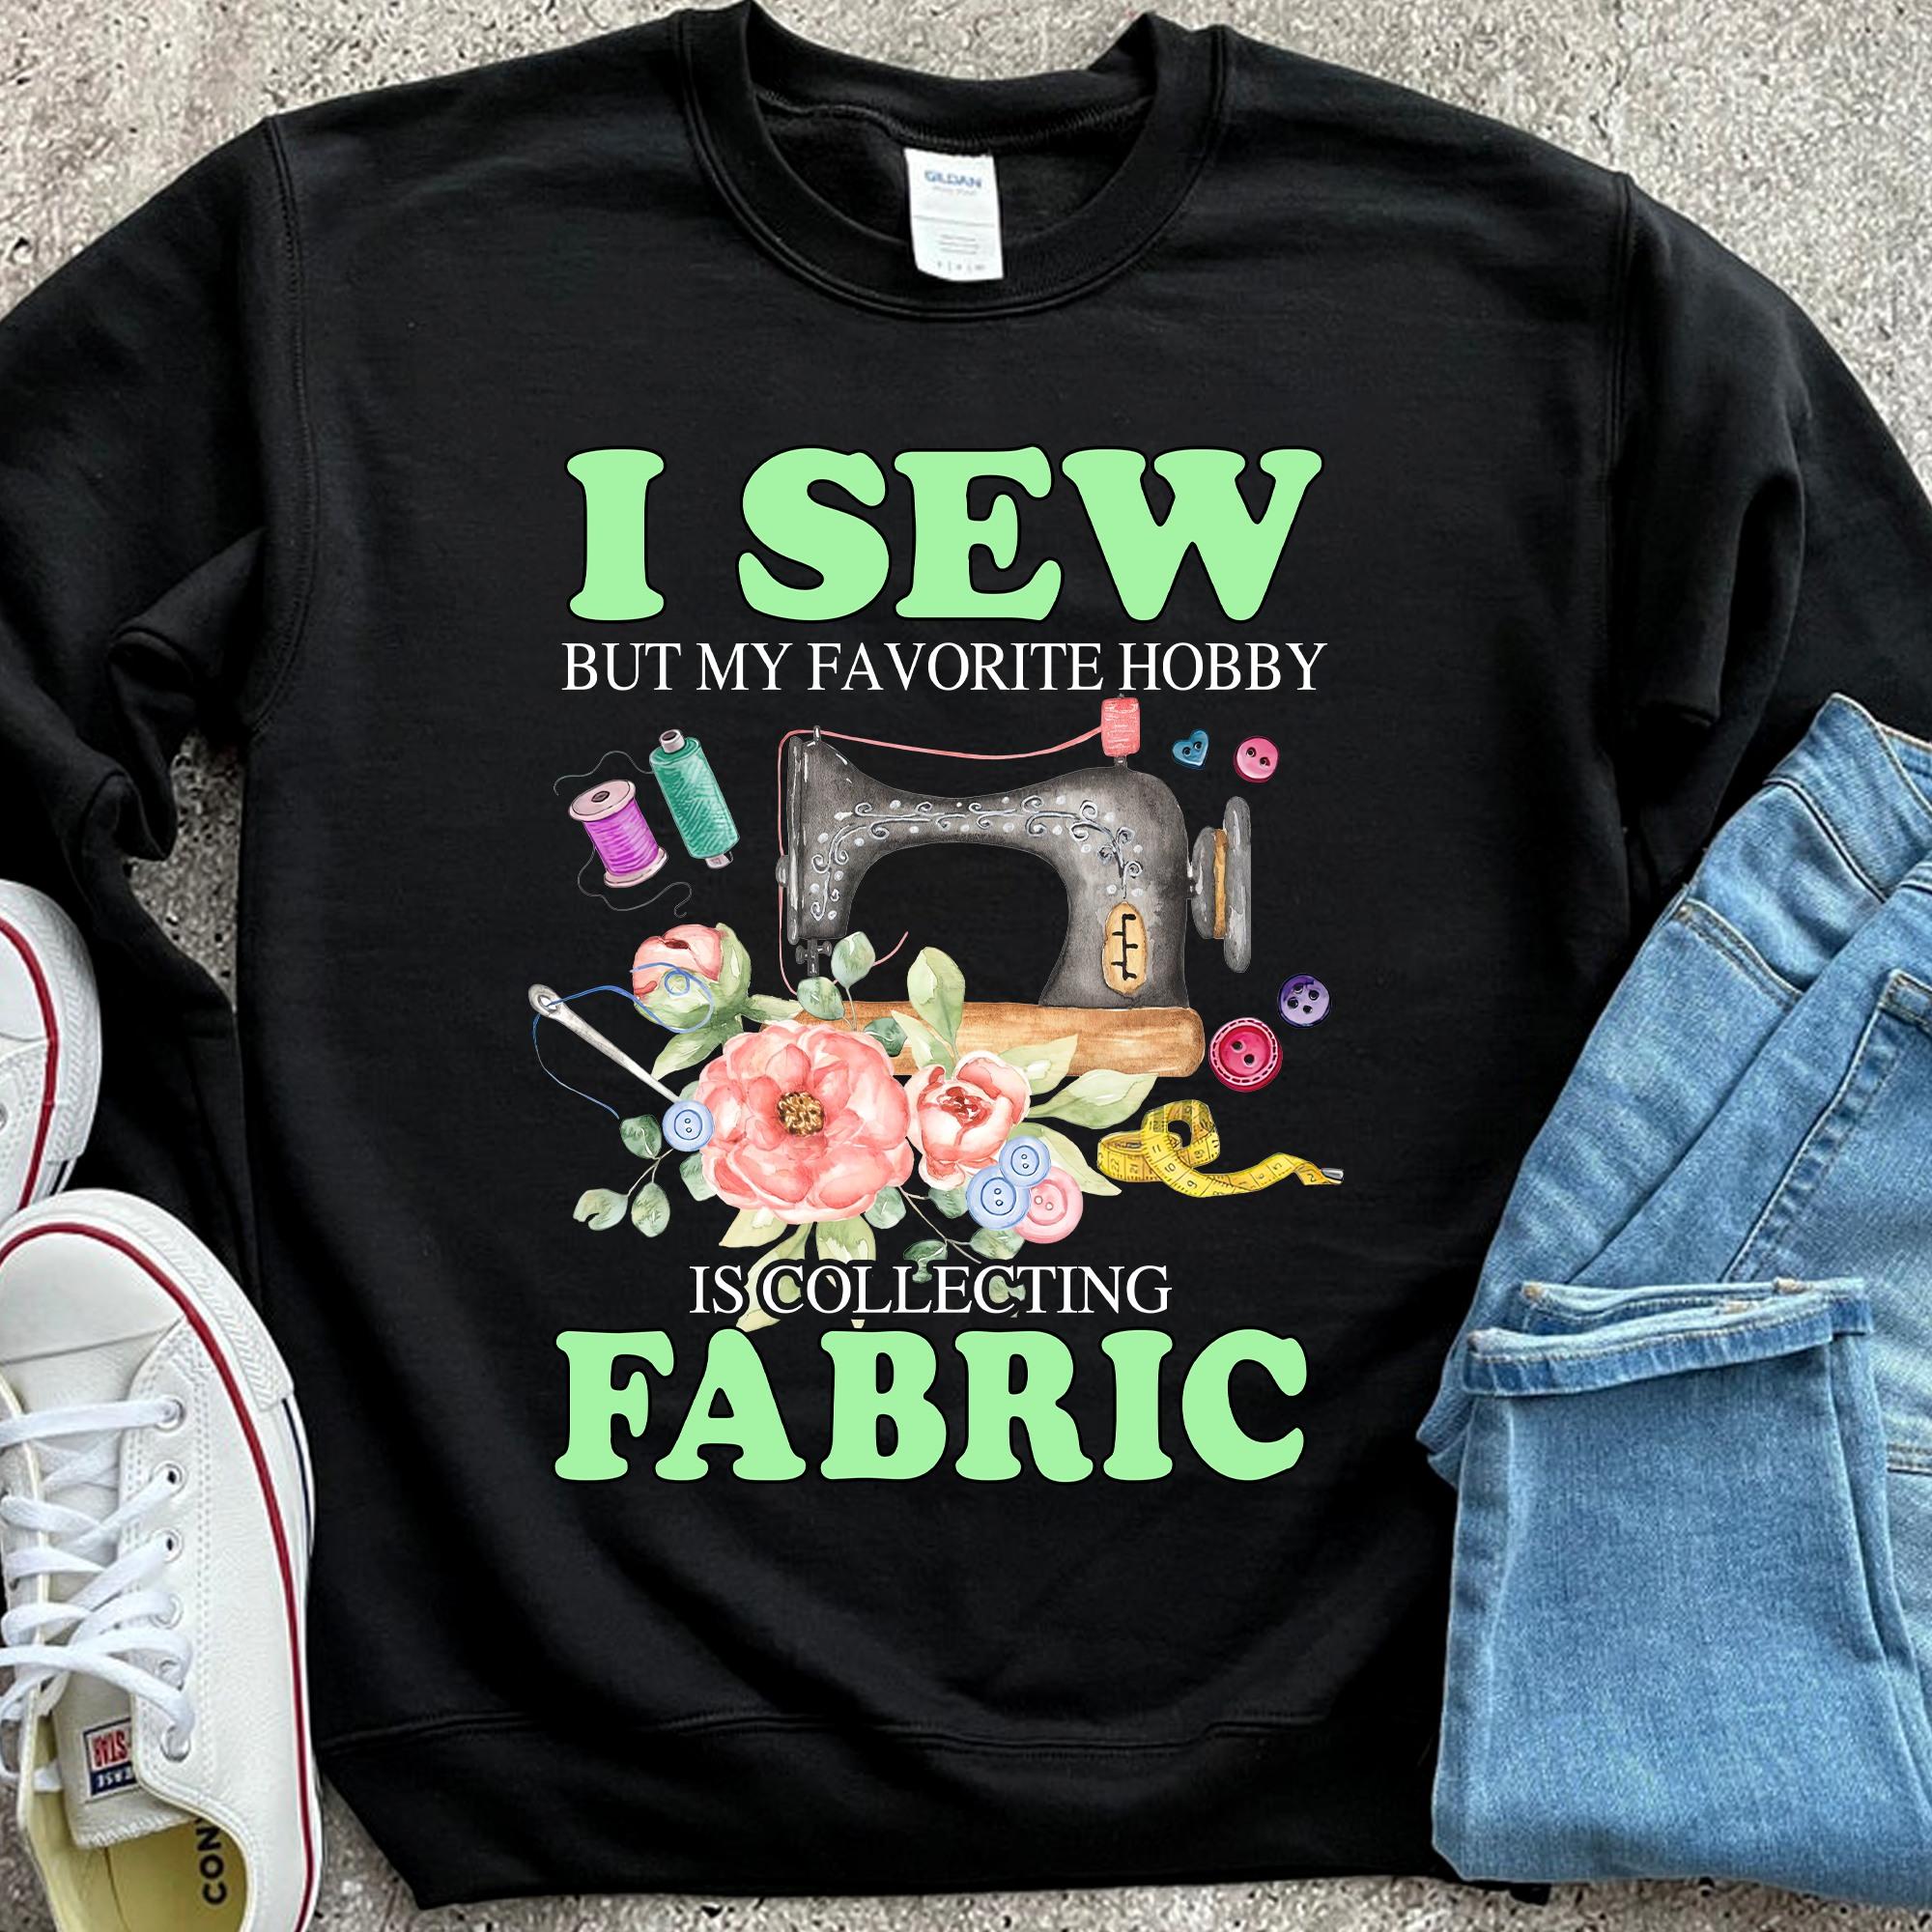 I sew but my favorite hobby is collecting fabric - Sewing machine, love sewing people